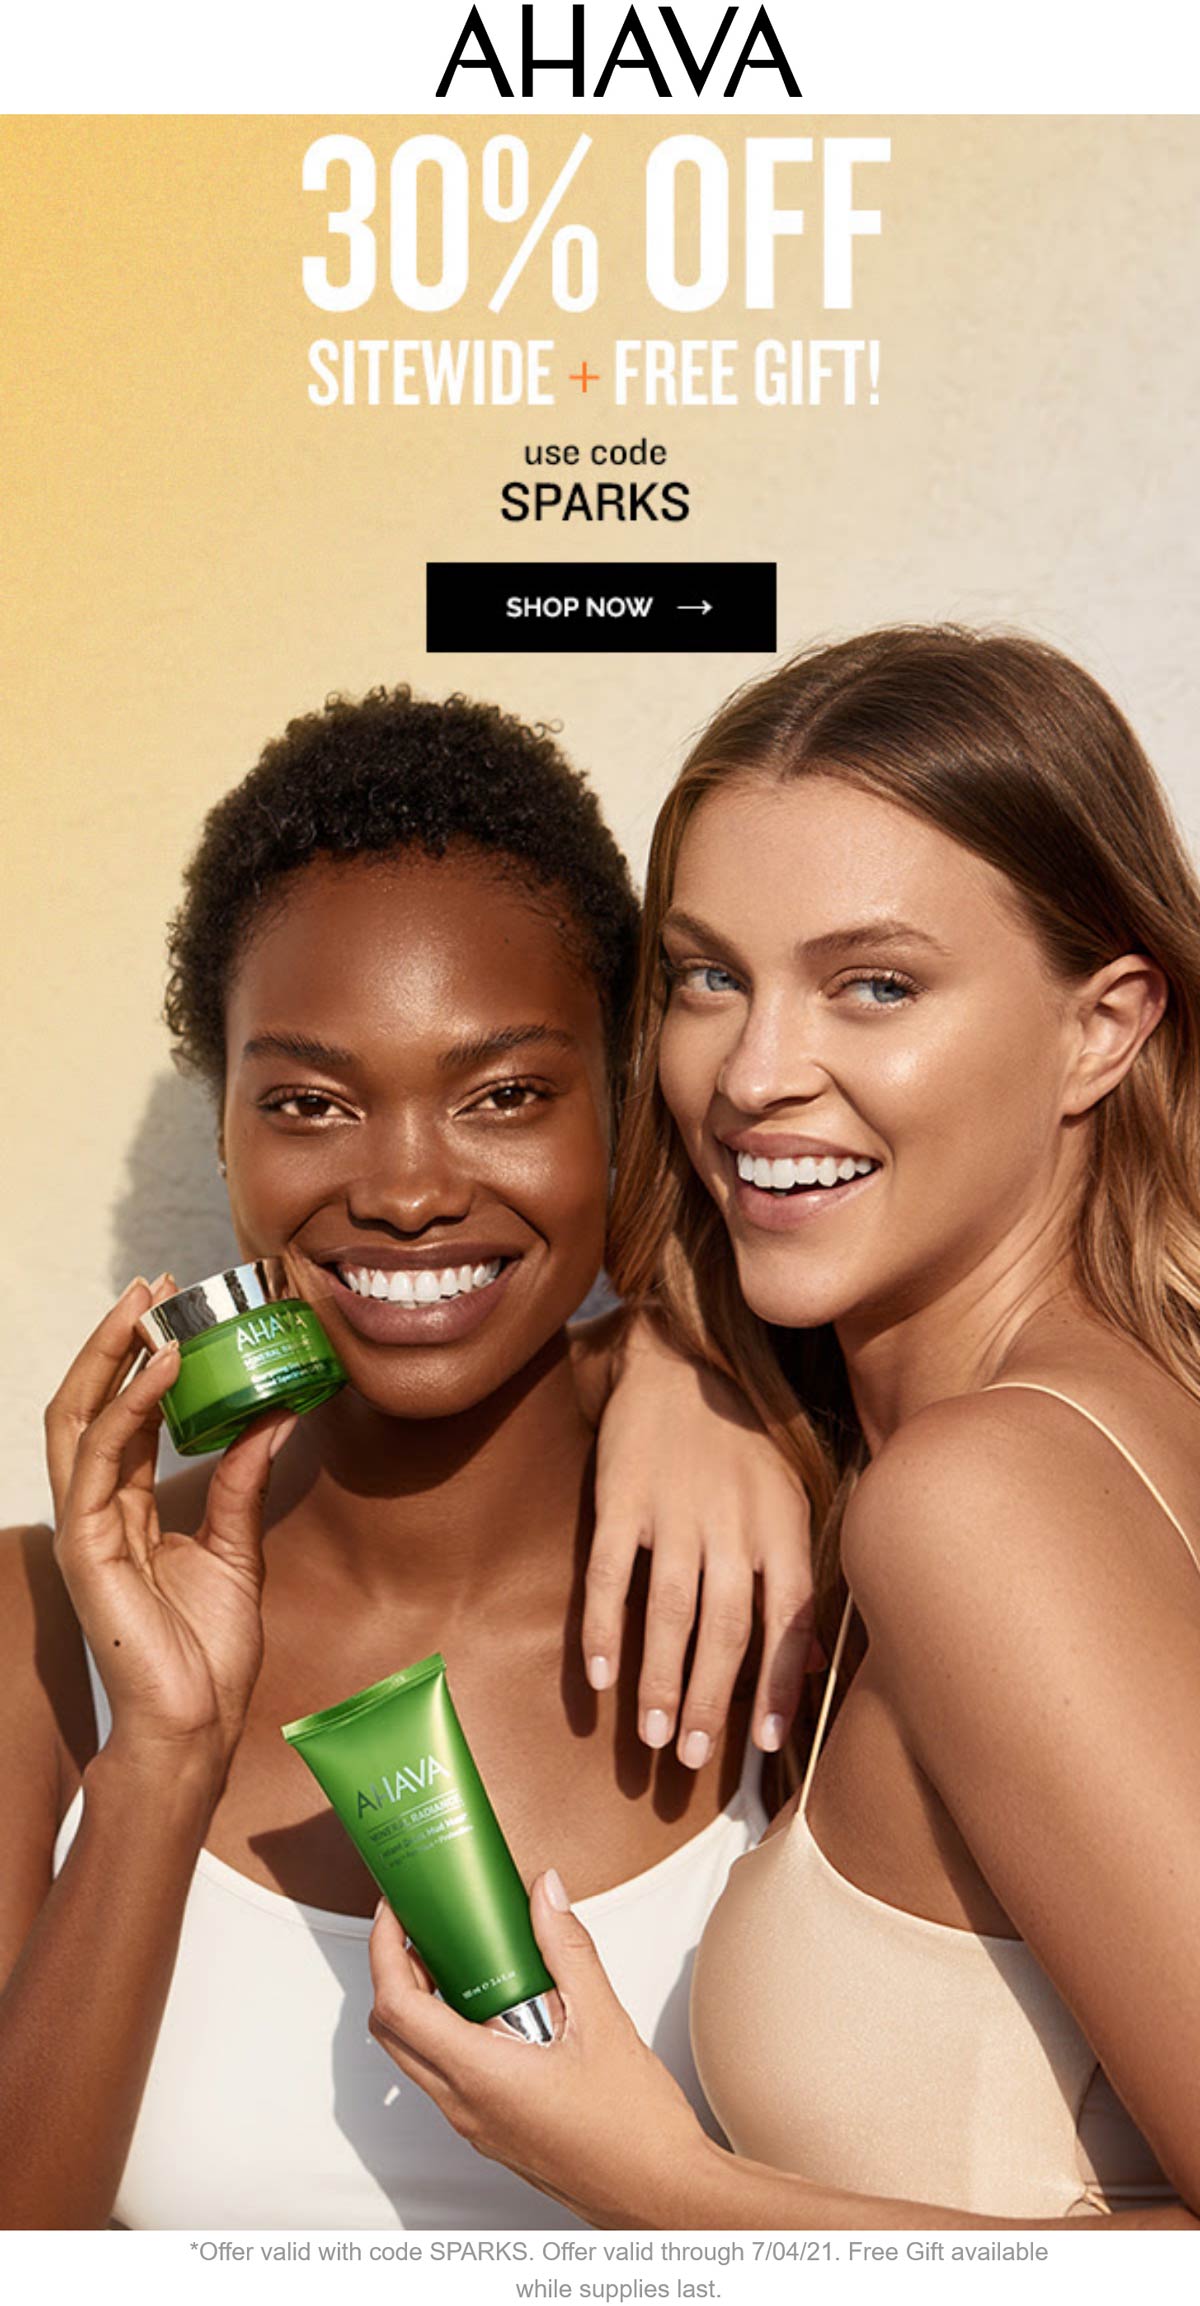 AHAVA stores Coupon  30% off everything + free gift online at AHAVA via promo code SPARKS #ahava 